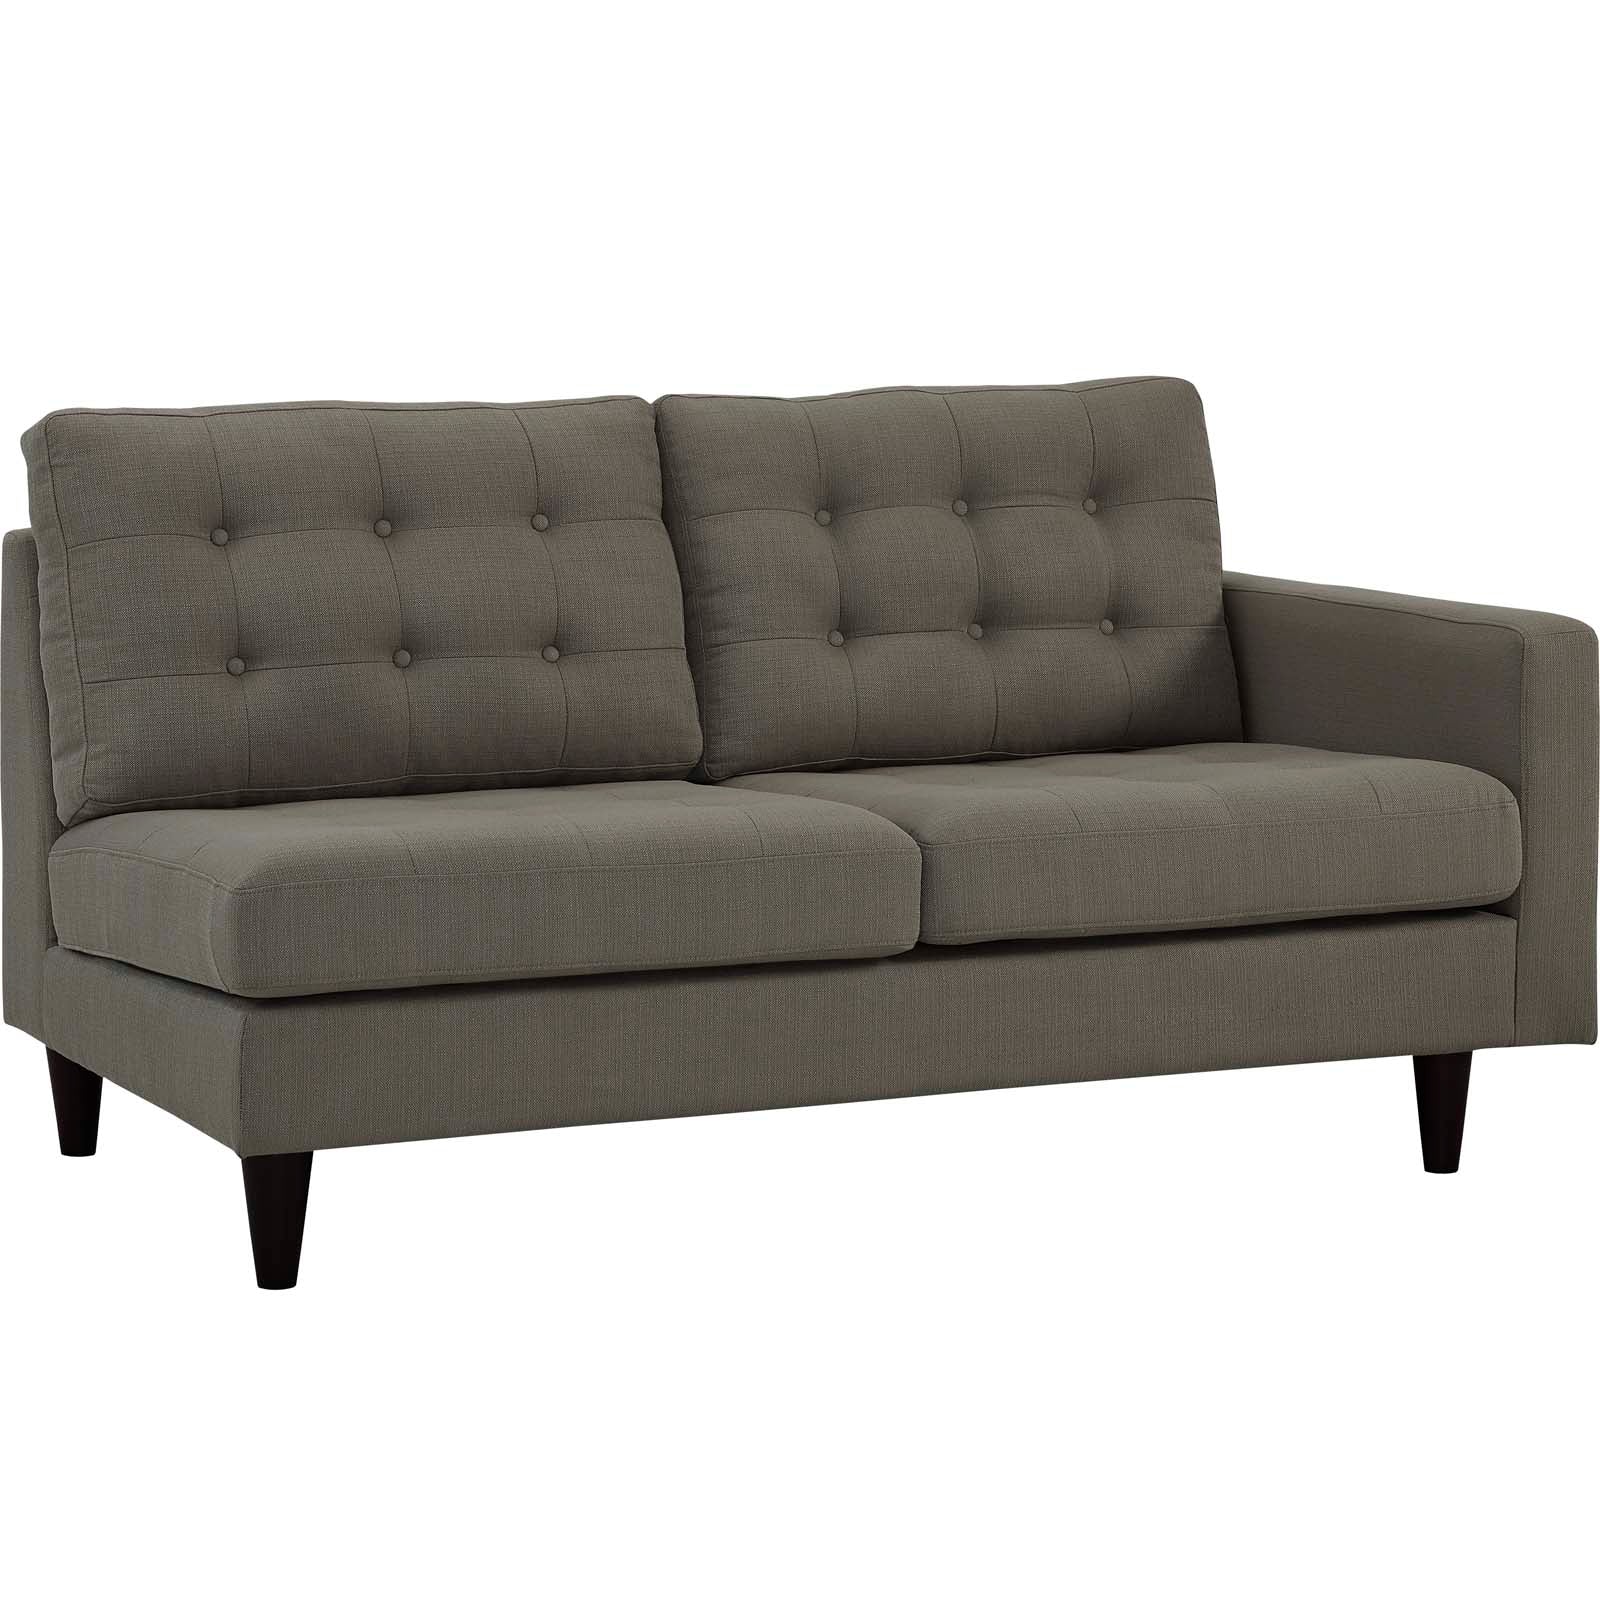 Modway Sectional Sofas - Empress 2 Piece Upholstered Fabric Left Facing Bumper Sectional Granite